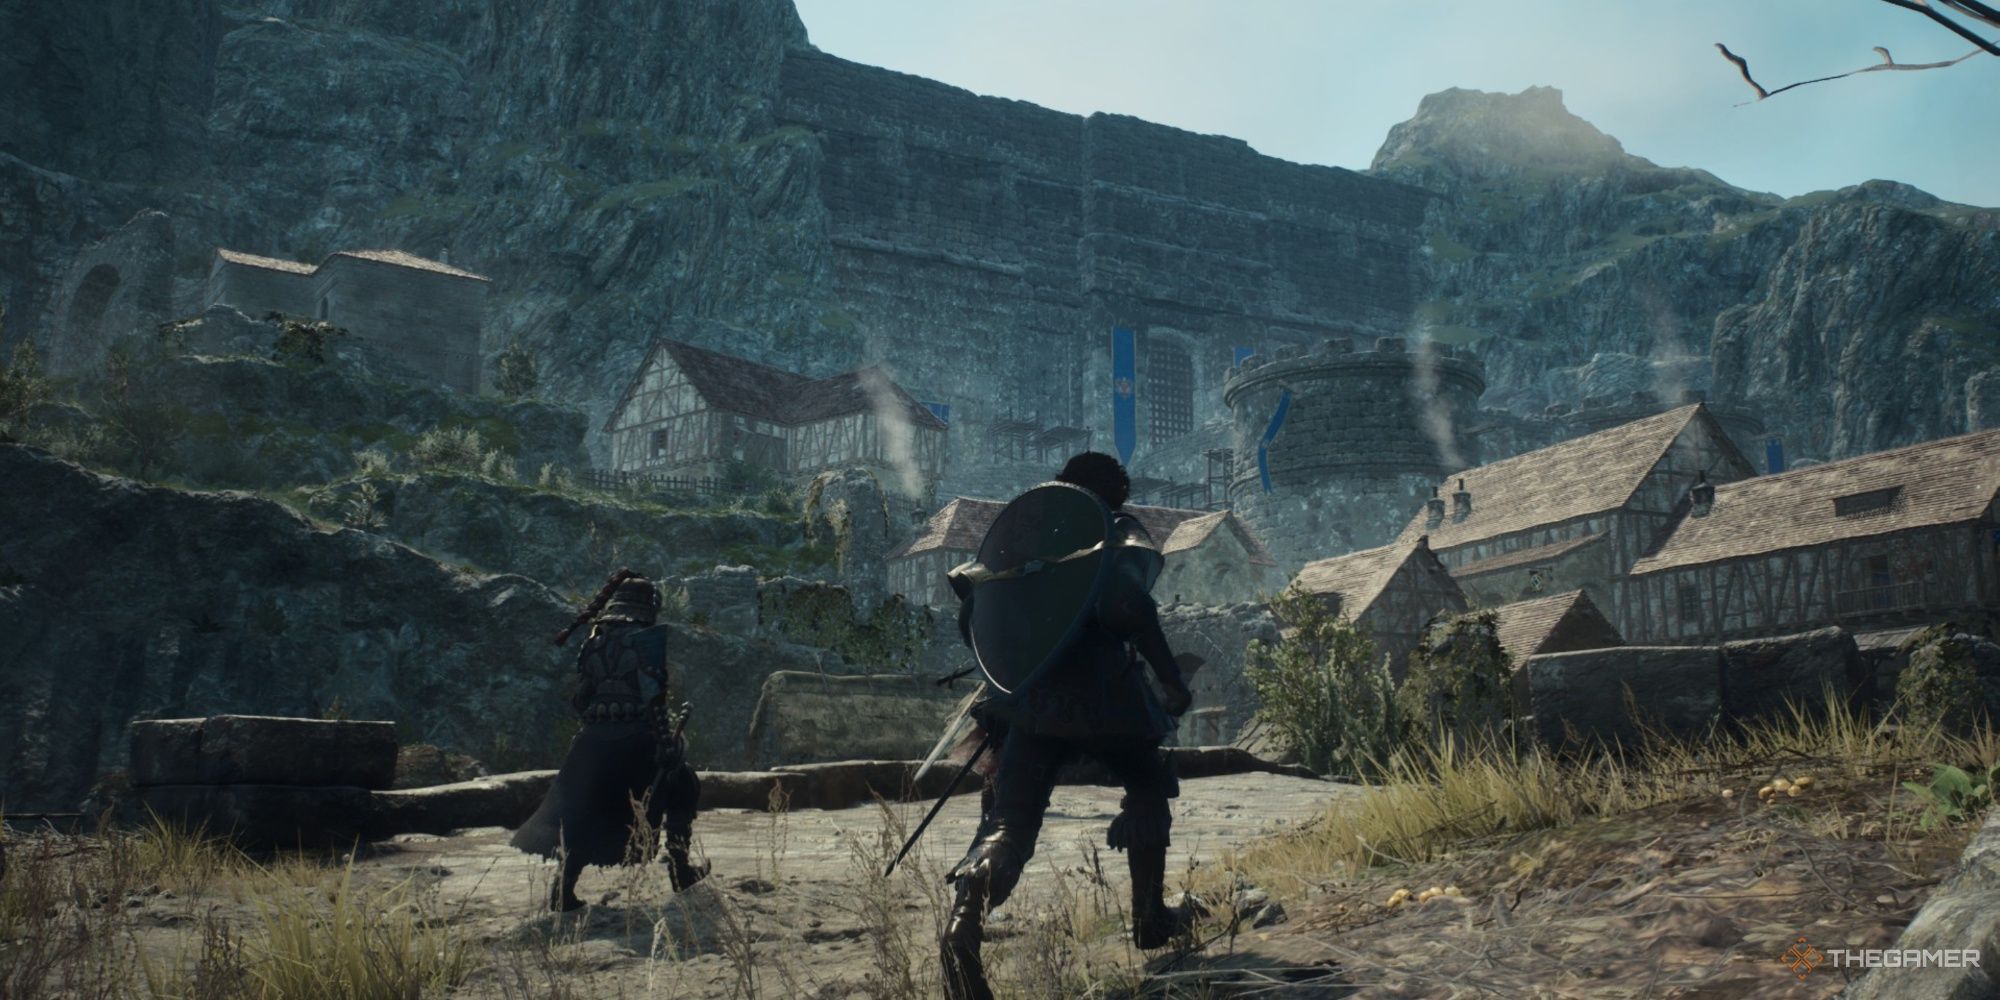 The prty walking towards Checkpoint Rest Town in Dragon's Dogma 2